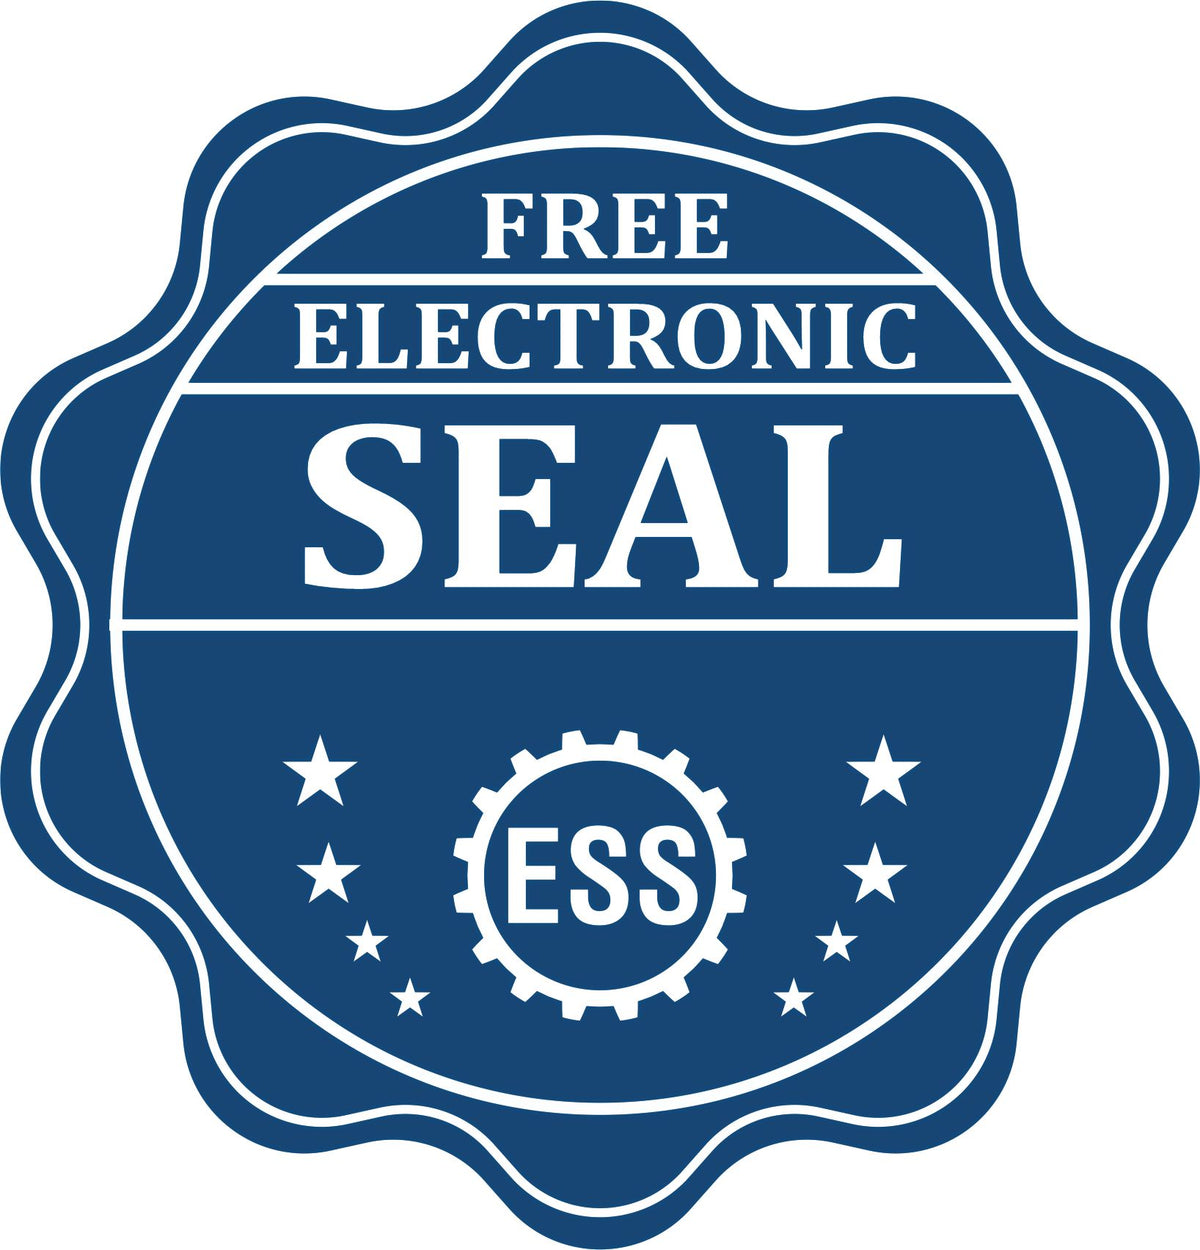 A badge showing a free electronic seal for the Slim Pre-Inked Maine Professional Geologist Seal Stamp with stars and the ESS gear on the emblem.